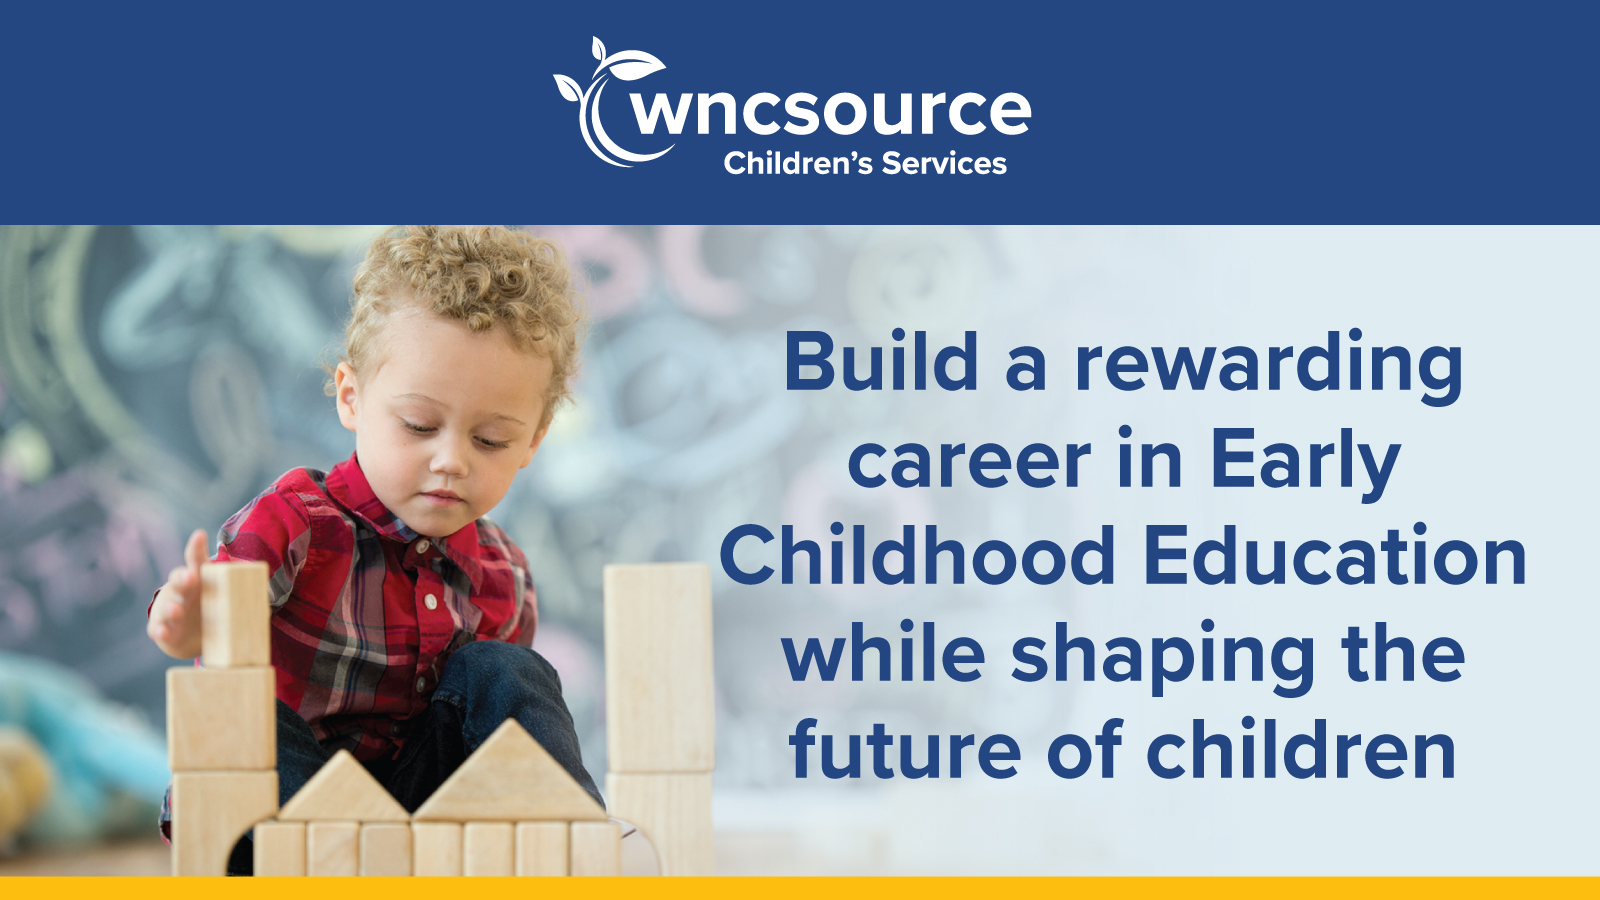 Build a rewarding career in Early Childhood Education